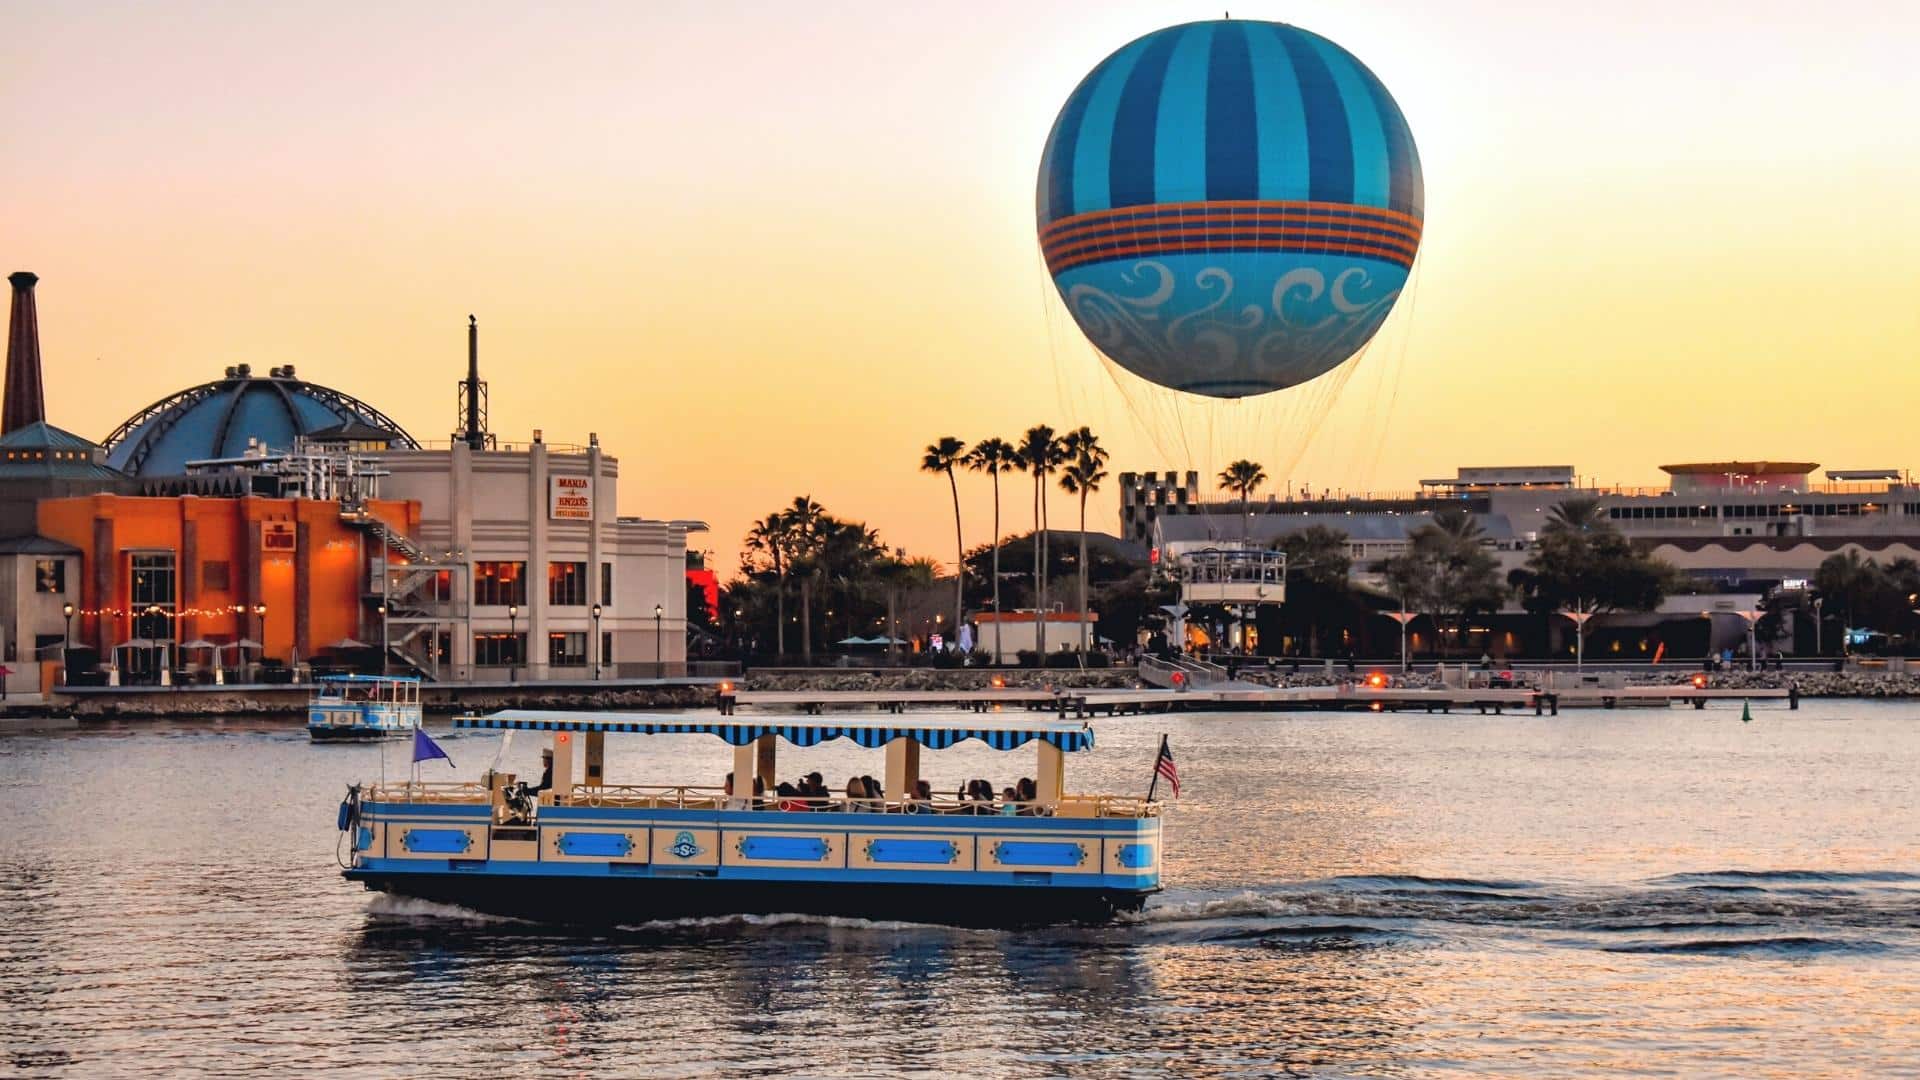 Things to Do for Adults - Disney Springs